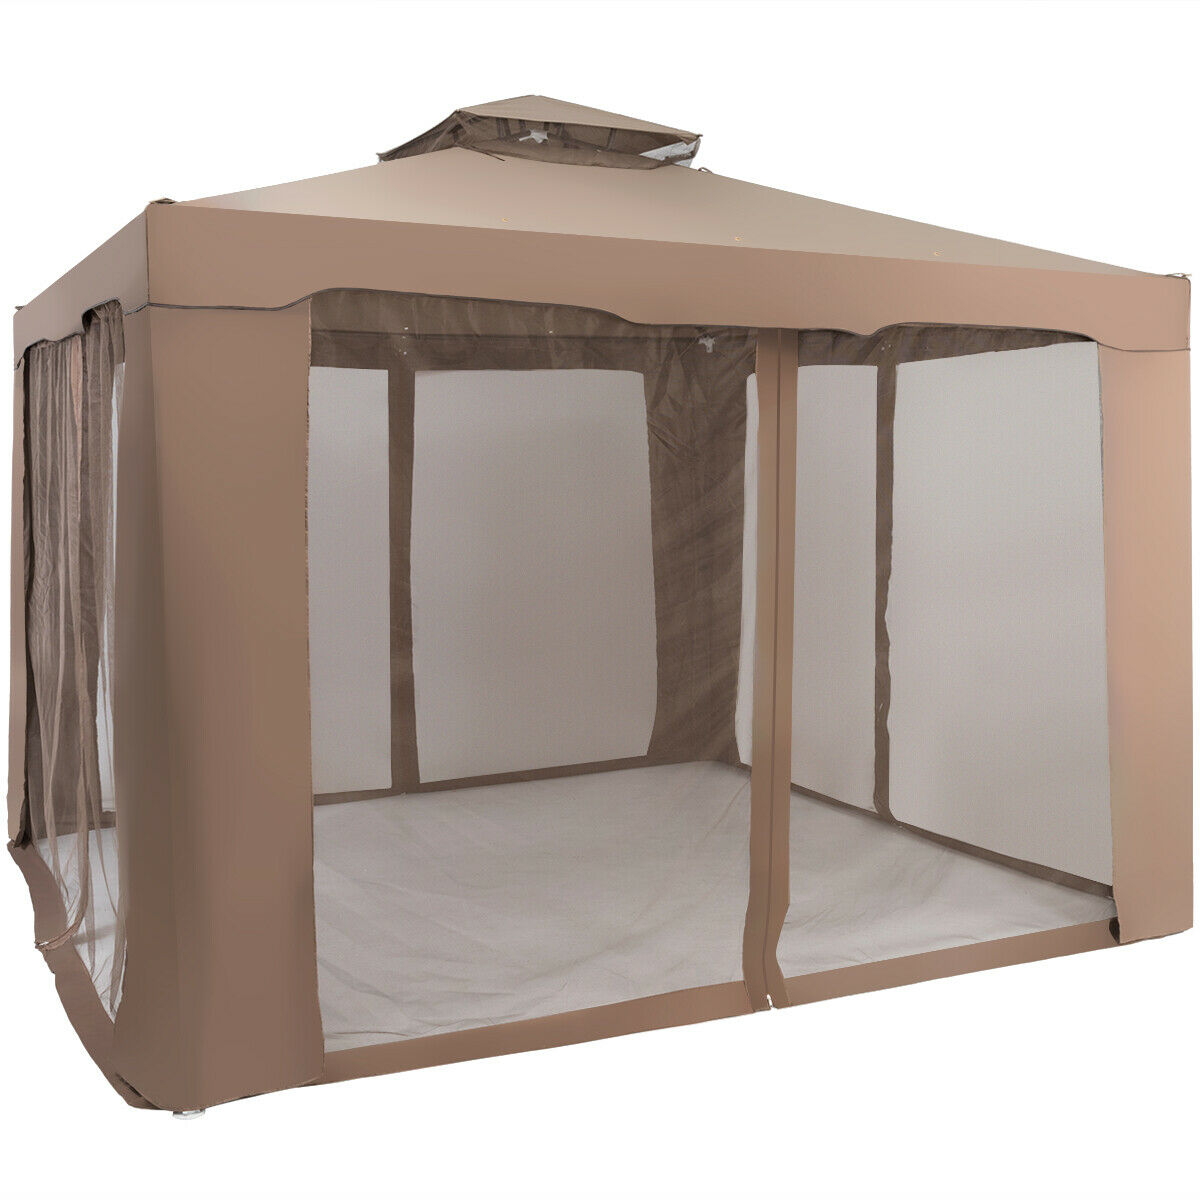 10 x 10ft Double Tiered Canopy Gazebo Garden Shelter Tent-Brown